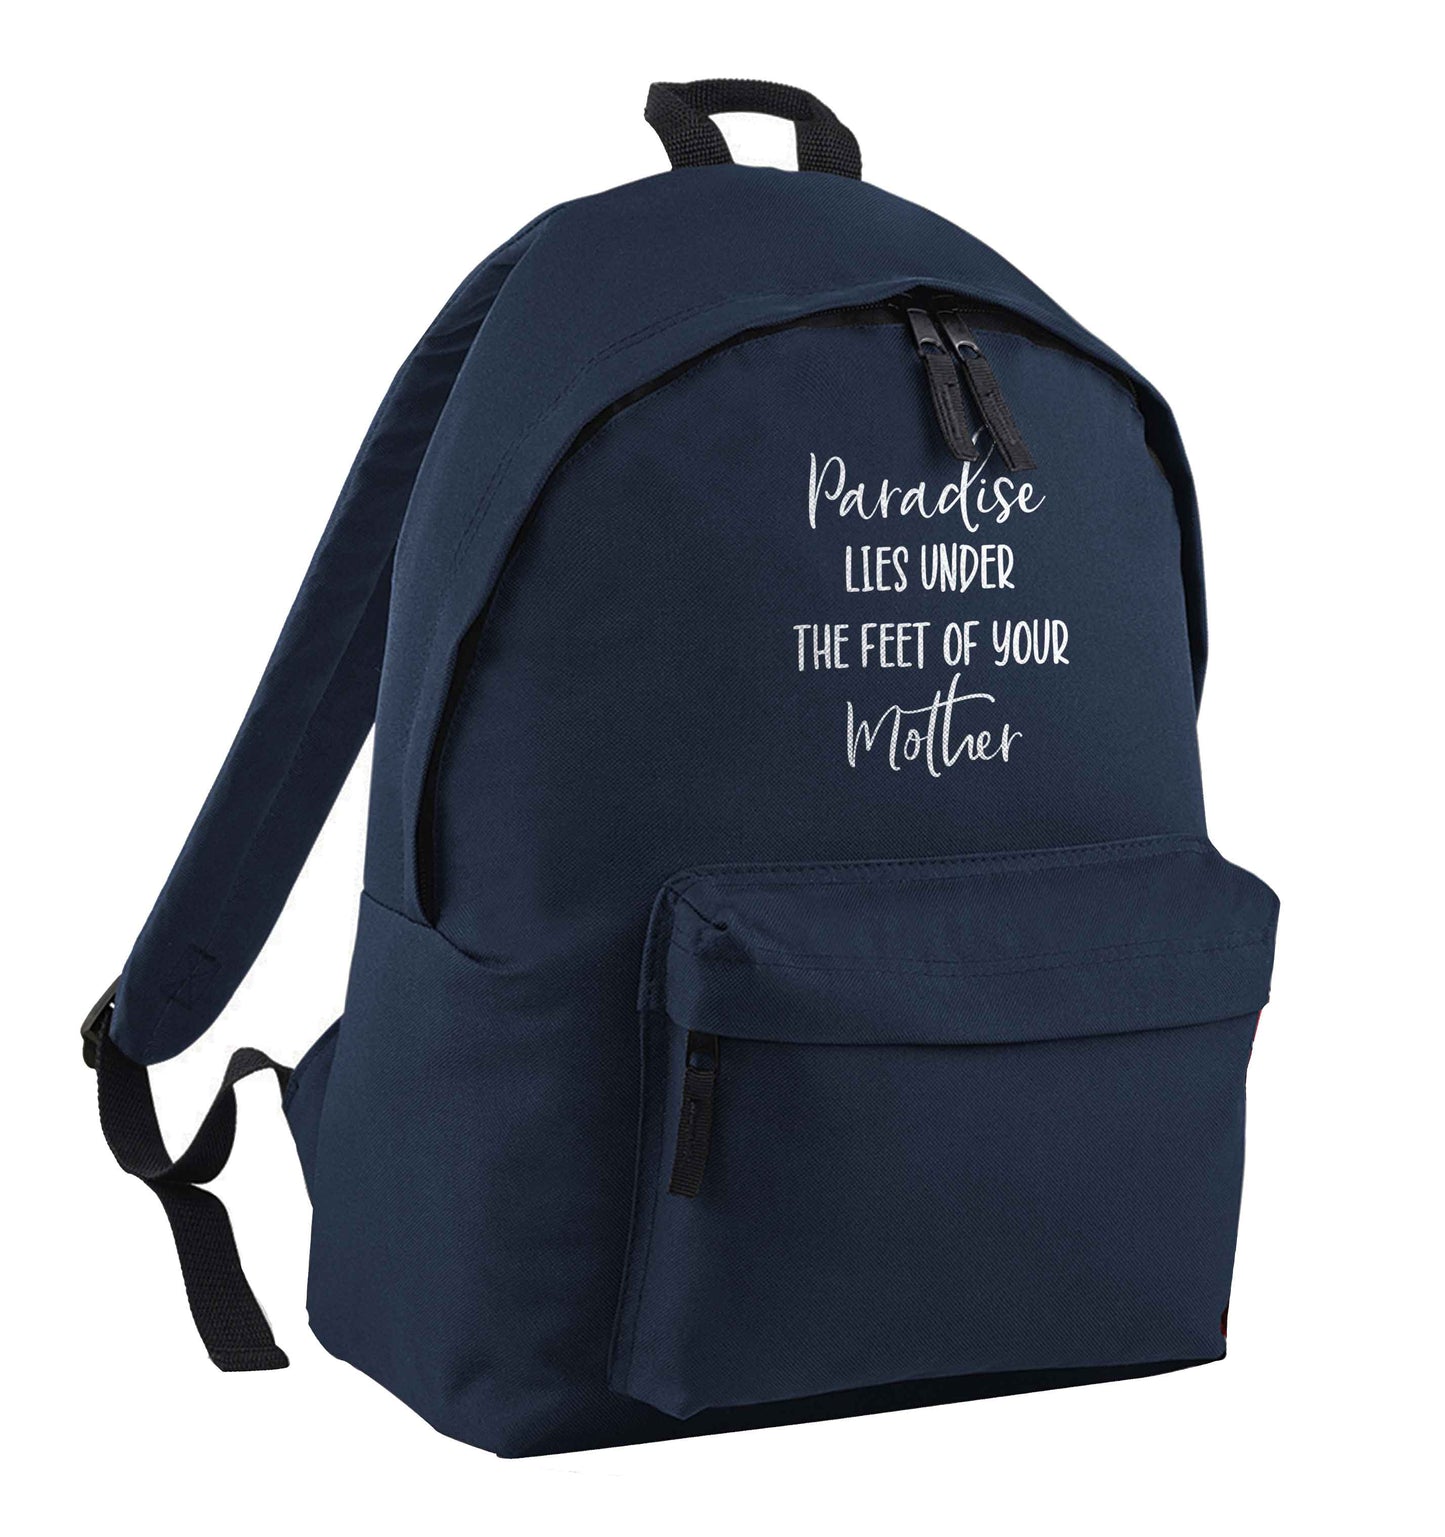 Paradise lies under the feet of your mother navy adults backpack